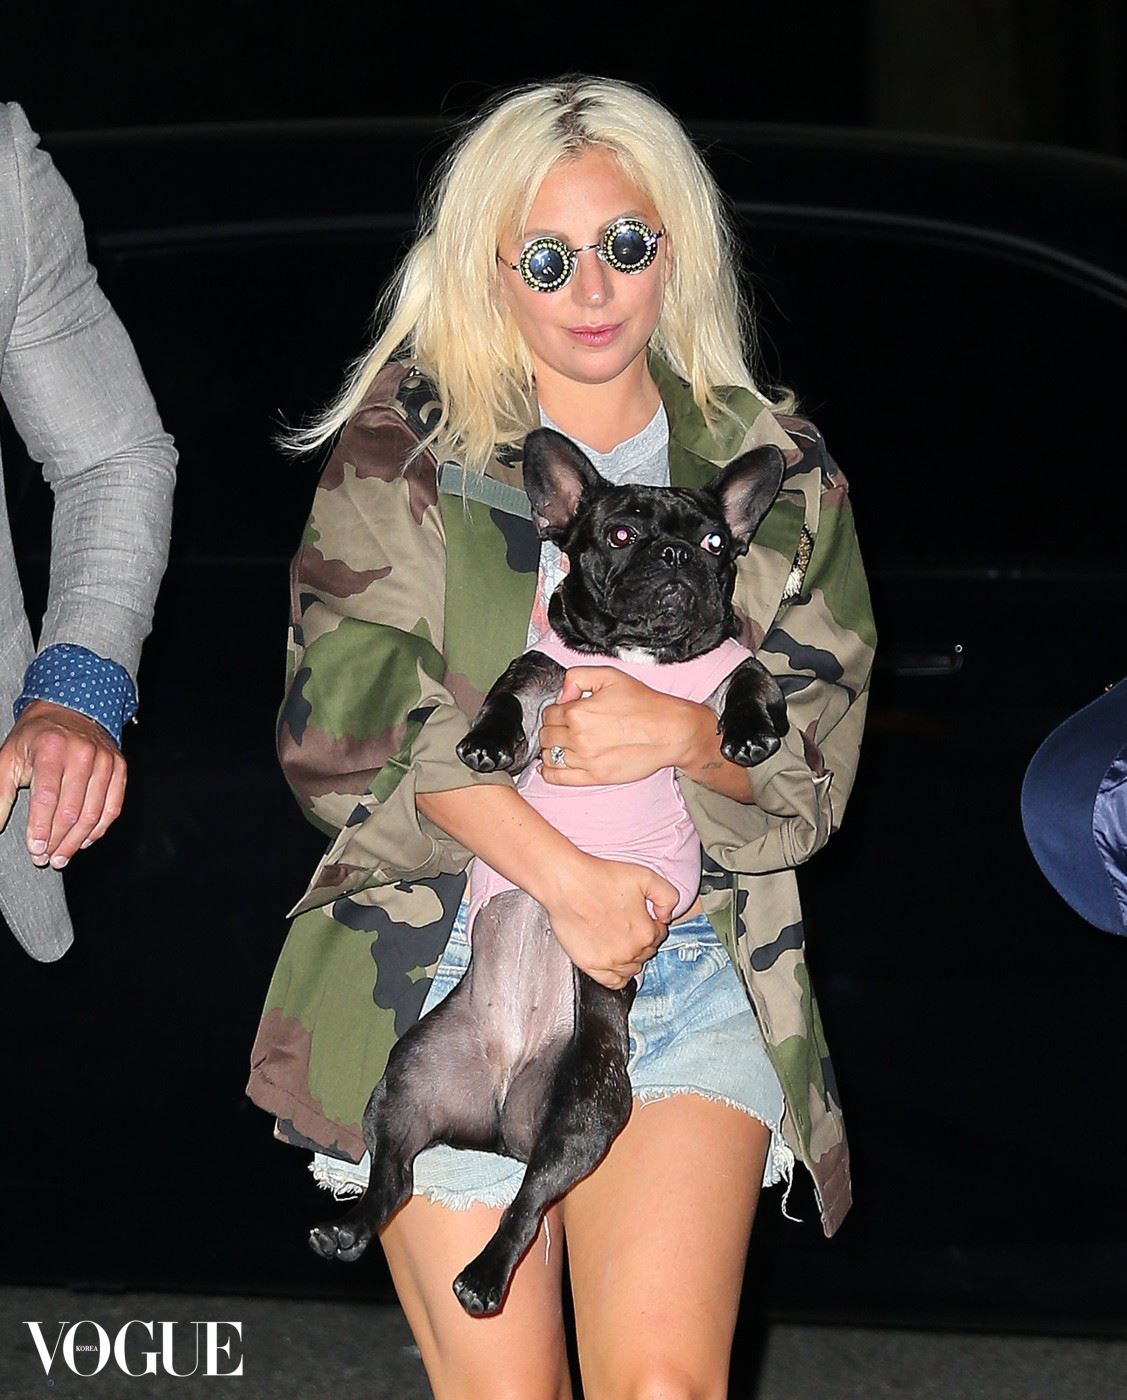 Lady Gaga appears to stumble down the stairs while departing her show at Radio City in NYC with her dog Asia. Pictured: Lady Gaga Ref: SPL1060433  220615   Picture by: XactpiX / Splash News Splash News and Pictures Los Angeles:	310-821-2666 New York:	212-619-2666 London:	870-934-2666 photodesk@splashnews.com 